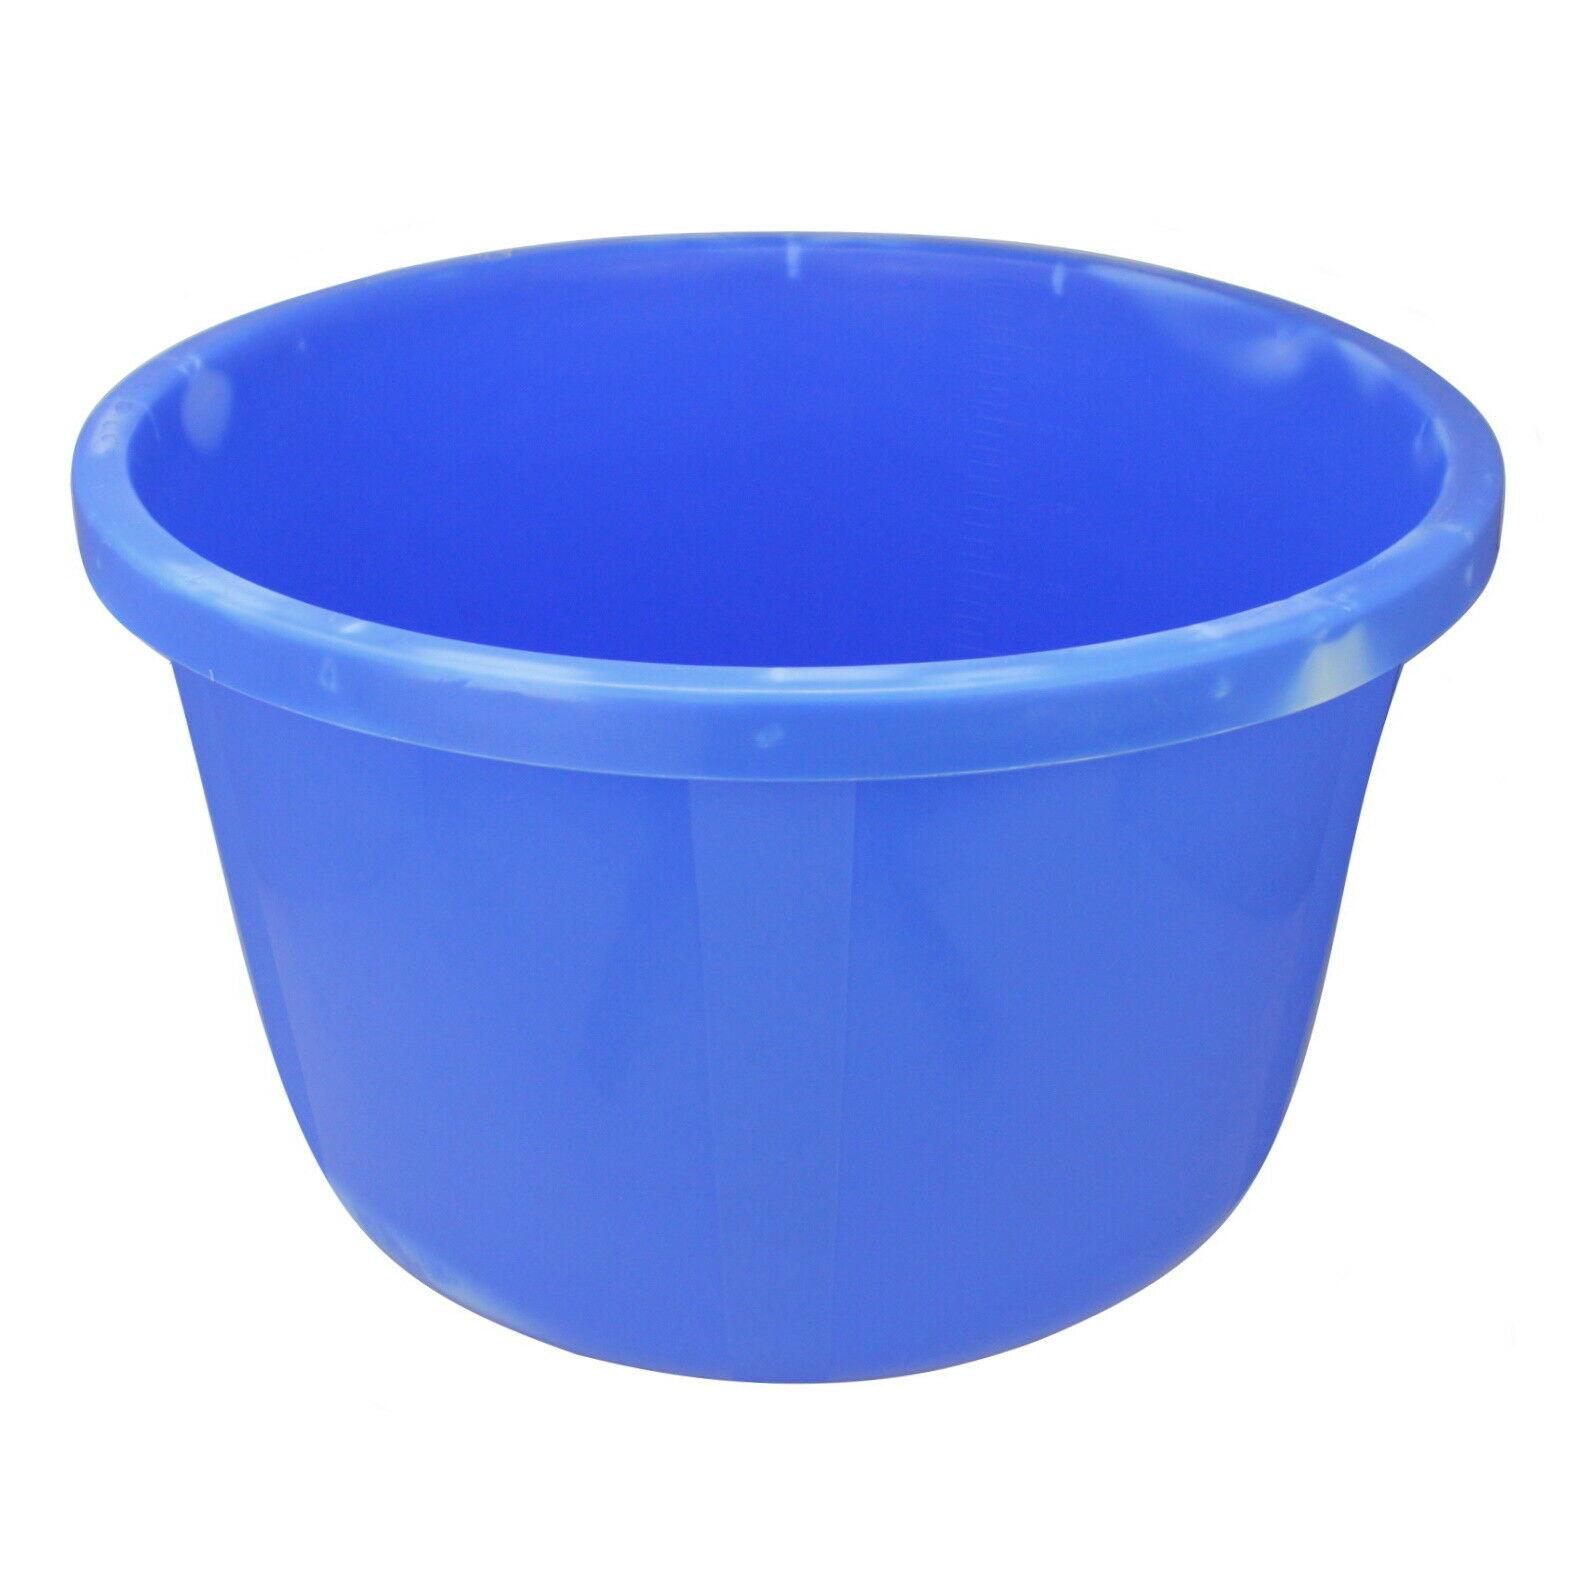 Large 36cm Plastic Deep Round Bowl Oatmeal Home Commercial Kitchen Storage